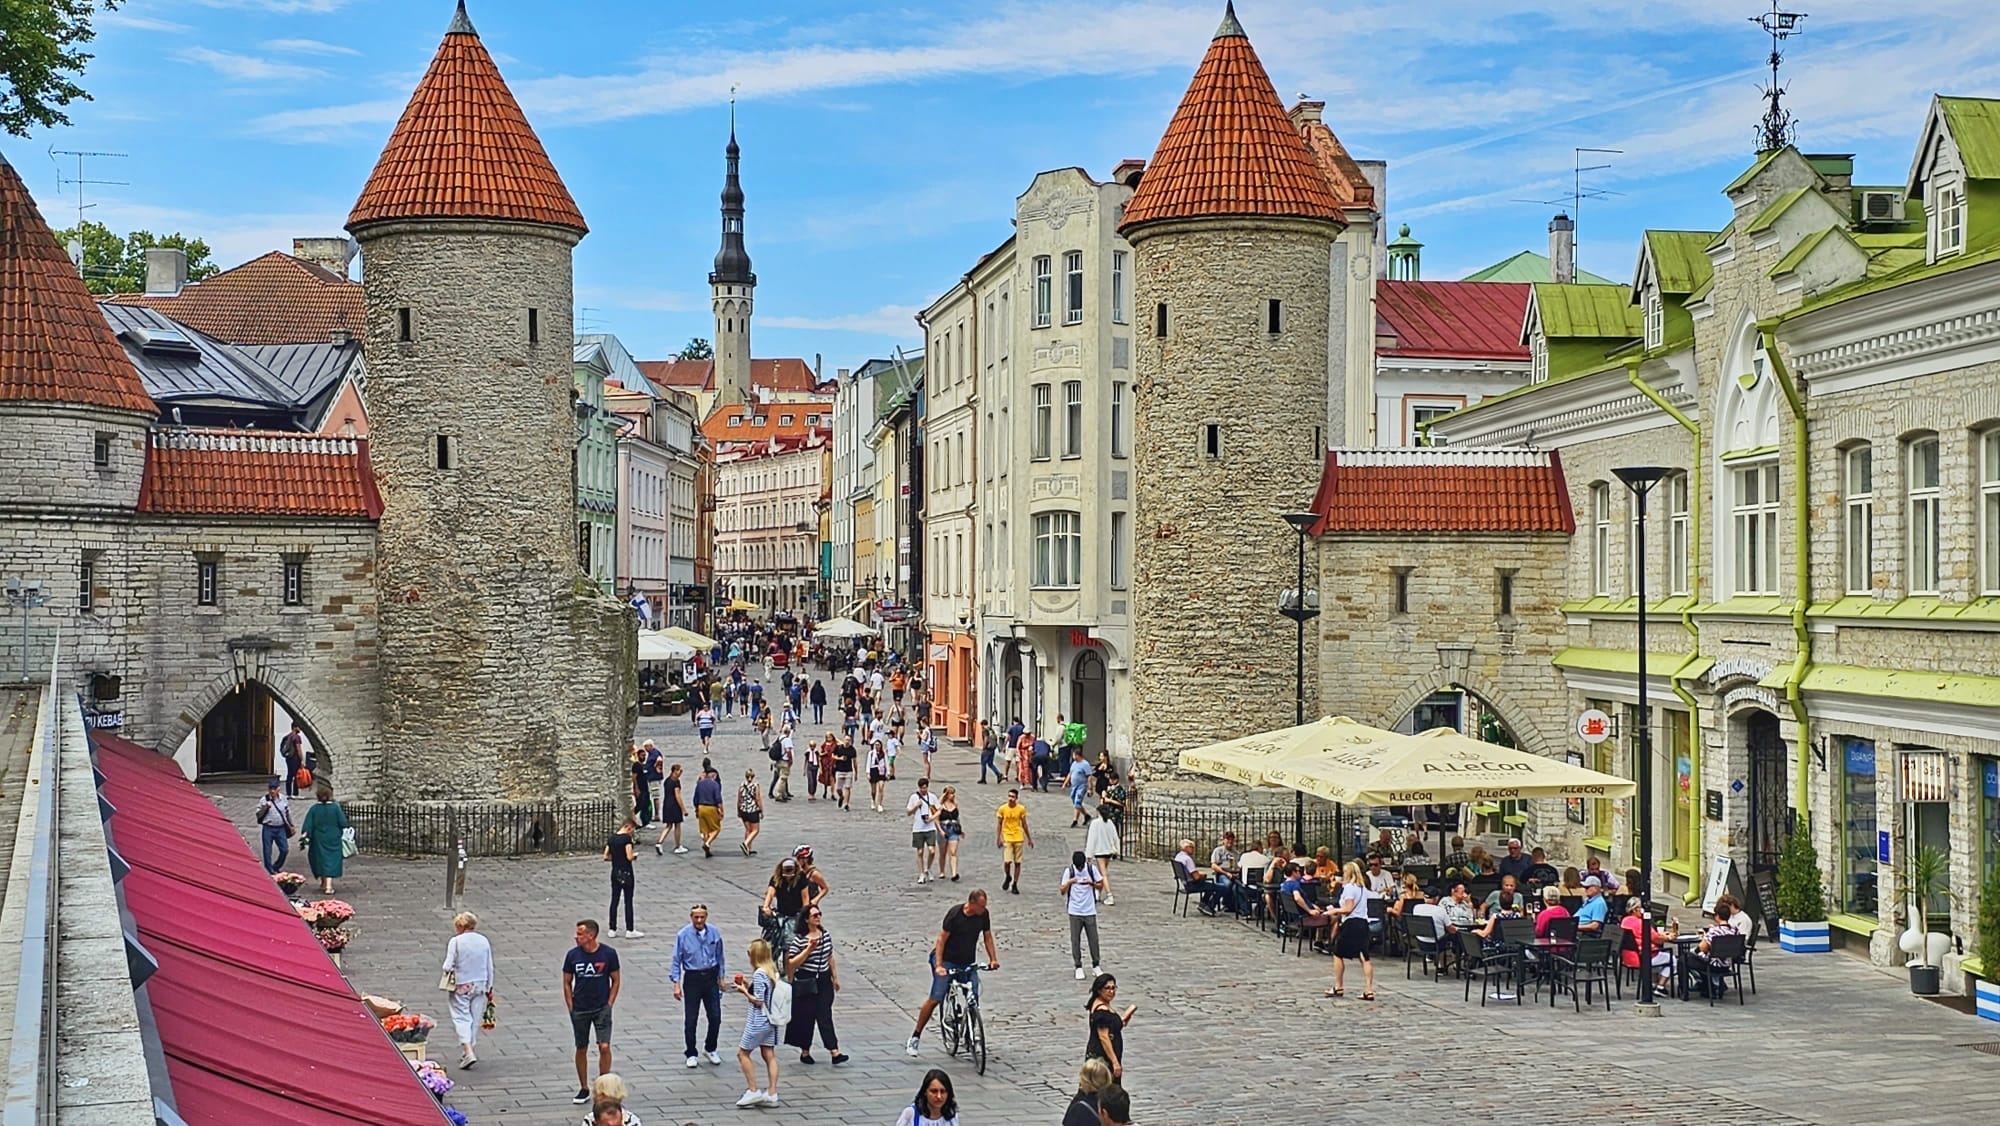 Old Town Tallinn - itinerary of things to do